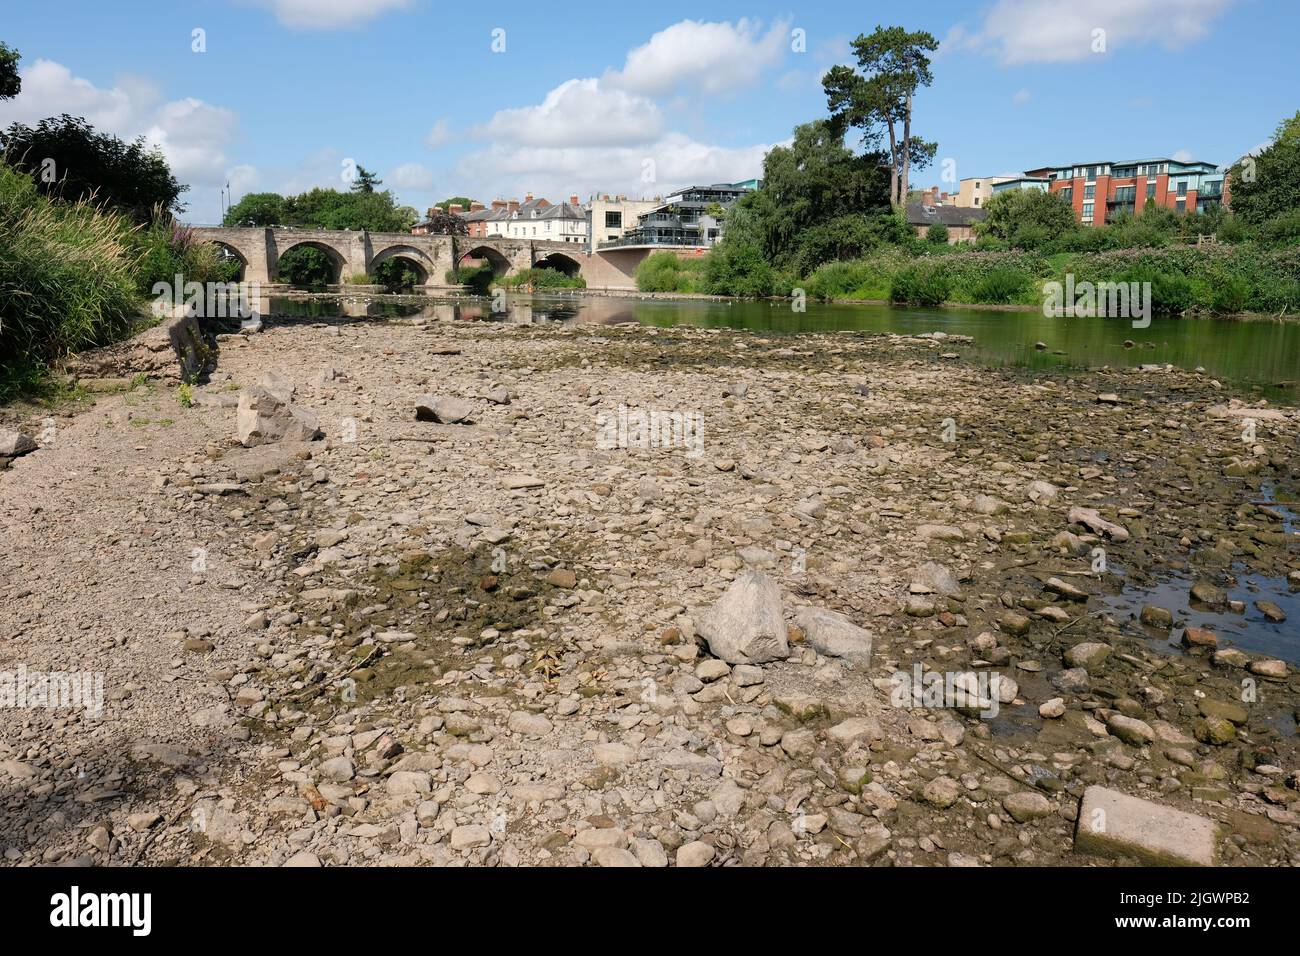 River Wye, Hereford, Herefordshire, UK – Wednesday 13th July 2022 – The river level on the River Wye as it passes through the city of Hereford is very low exposing parts of the riverbed. The Environment Agency river level gauge in the city recorded a value of less than 10cm today. The river water temperature was recorded at 20c yesterday posing a threat to fish in the river.  The local weather forecast shows no rain in the next week during a prolonged hot dry spell. Photo Steven May / Alamy Live News Stock Photo